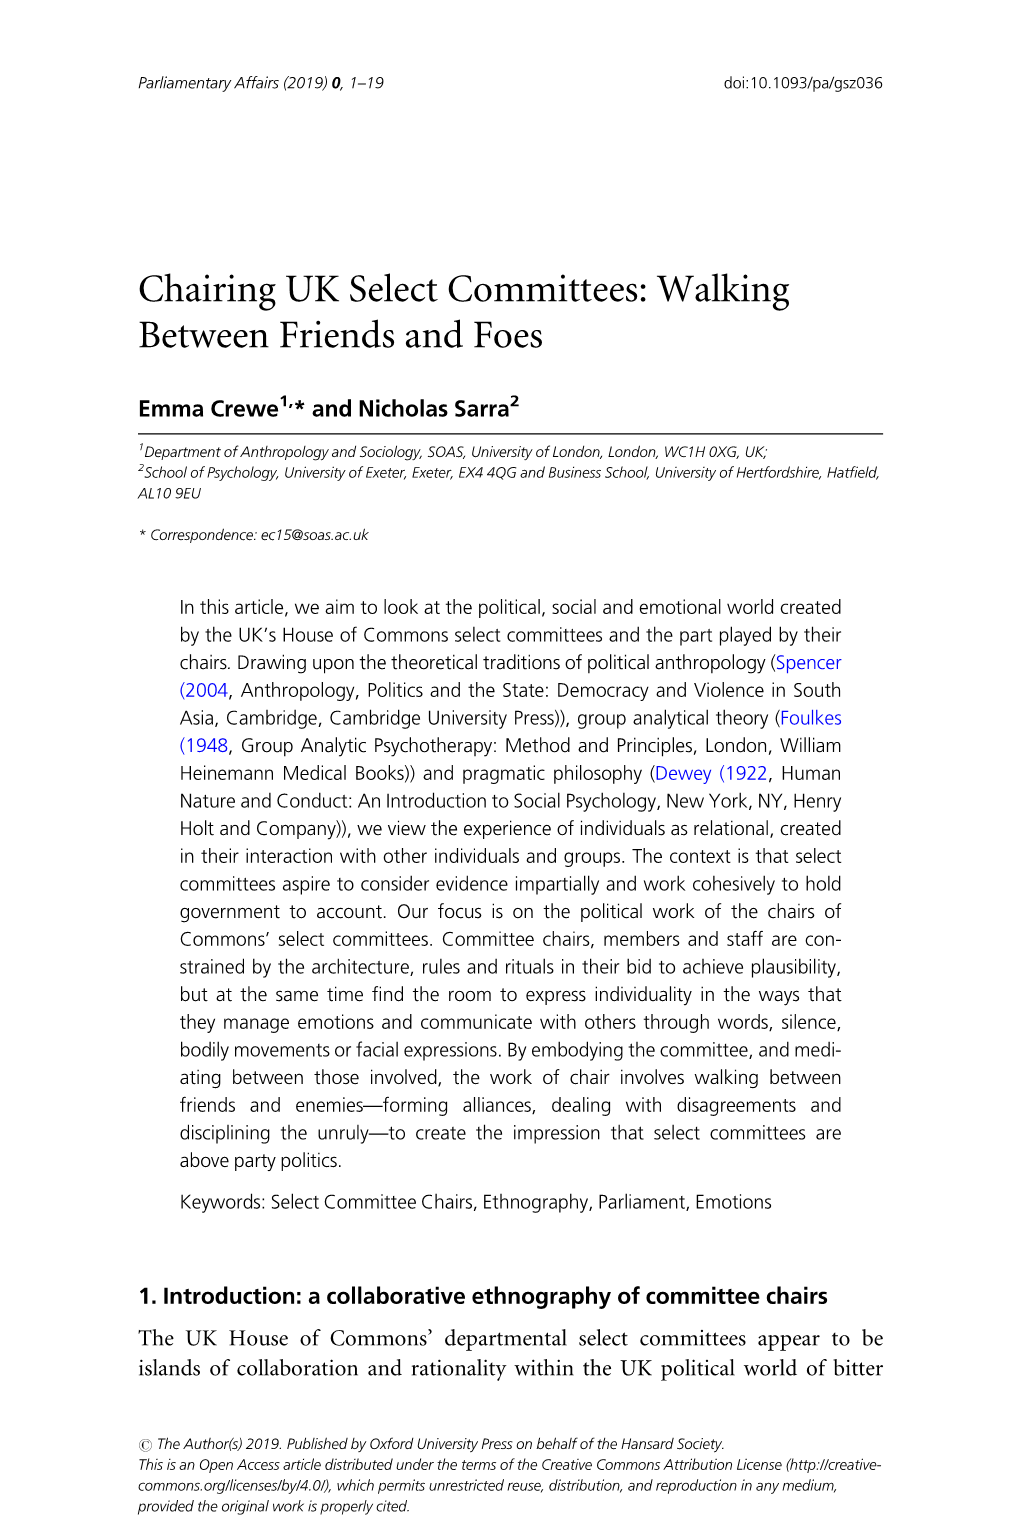 Chairing UK Select Committees: Walking Between Friends and Foes